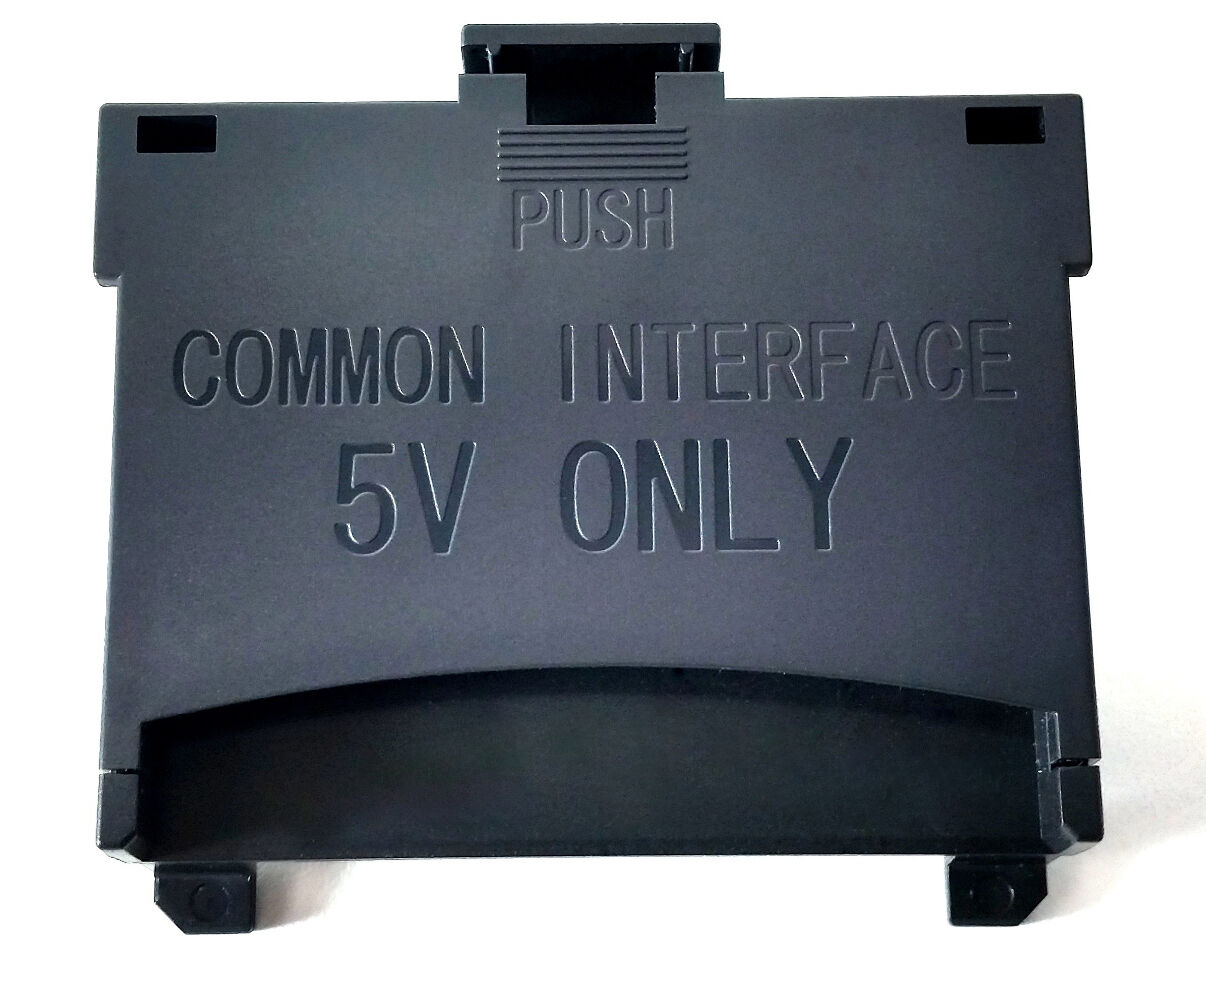 Samsung Common Interface TV 5V CI Connector Card Slot Adapter